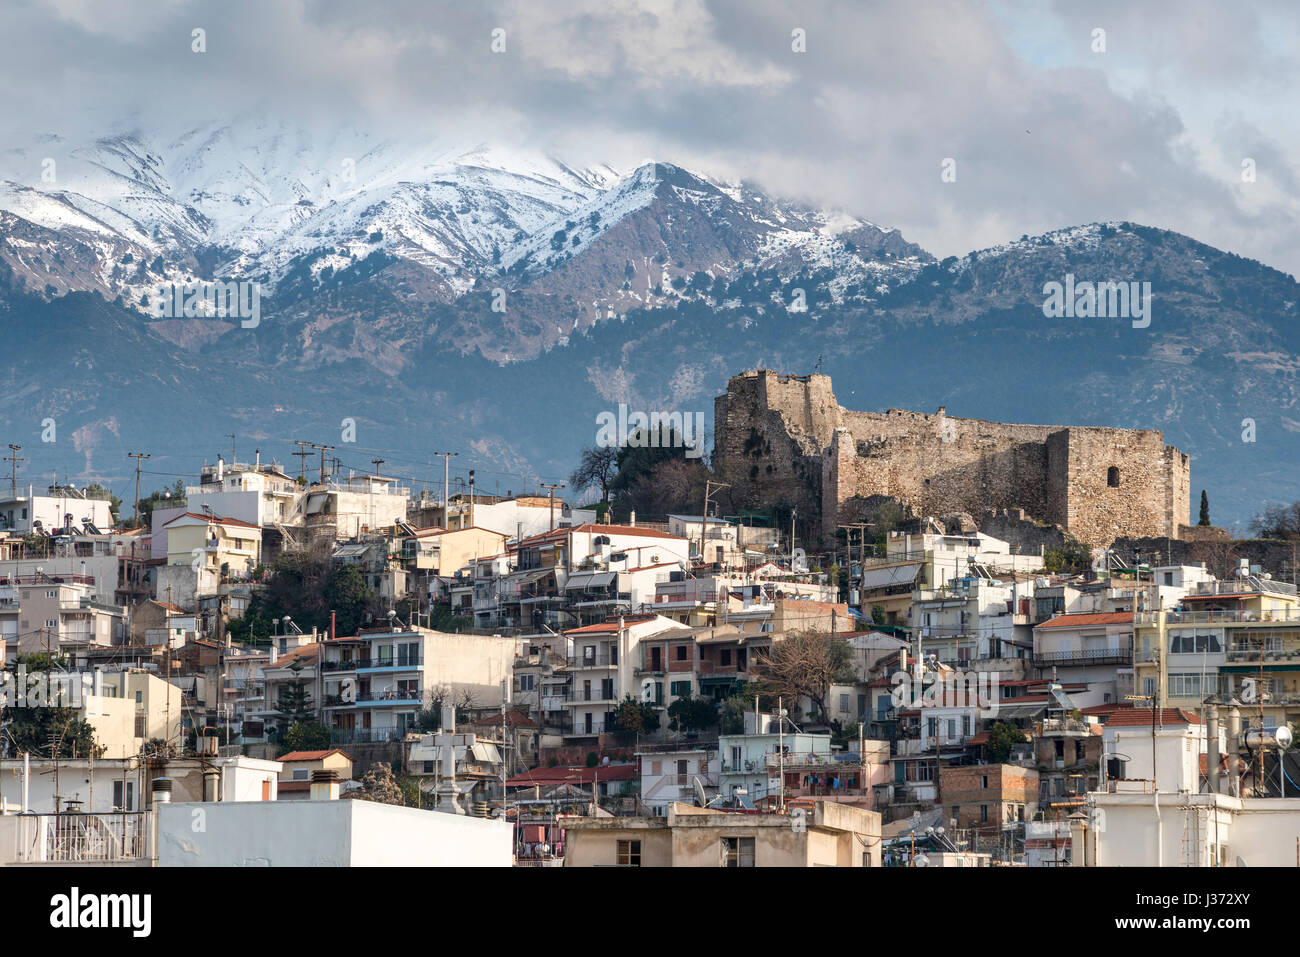 Looking towards old Patras and its castle, with Mount Panachaiko in the background, Patras, Achaea, Peloponnese, Greece Stock Photo